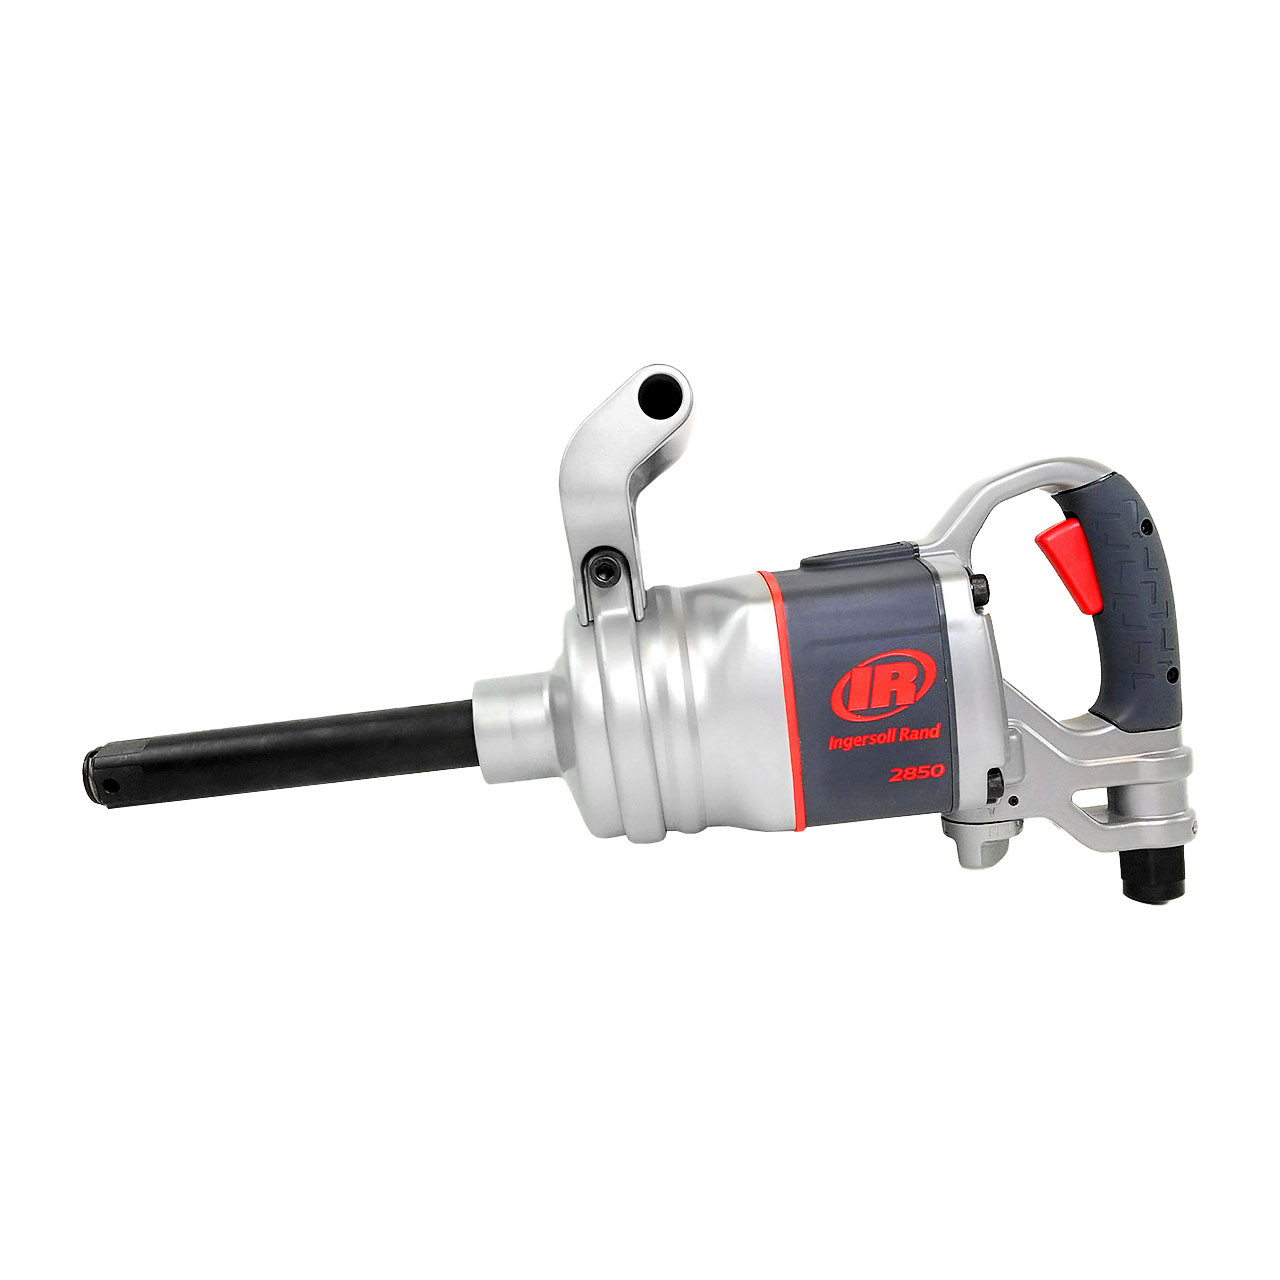 https://cdn11.bigcommerce.com/s-f4083/images/stencil/1280x1280/products/143218/229046/air-impact-wrench-dhandle-JB-IRT2850MAX-6__90275.1709672199.jpg?c=2